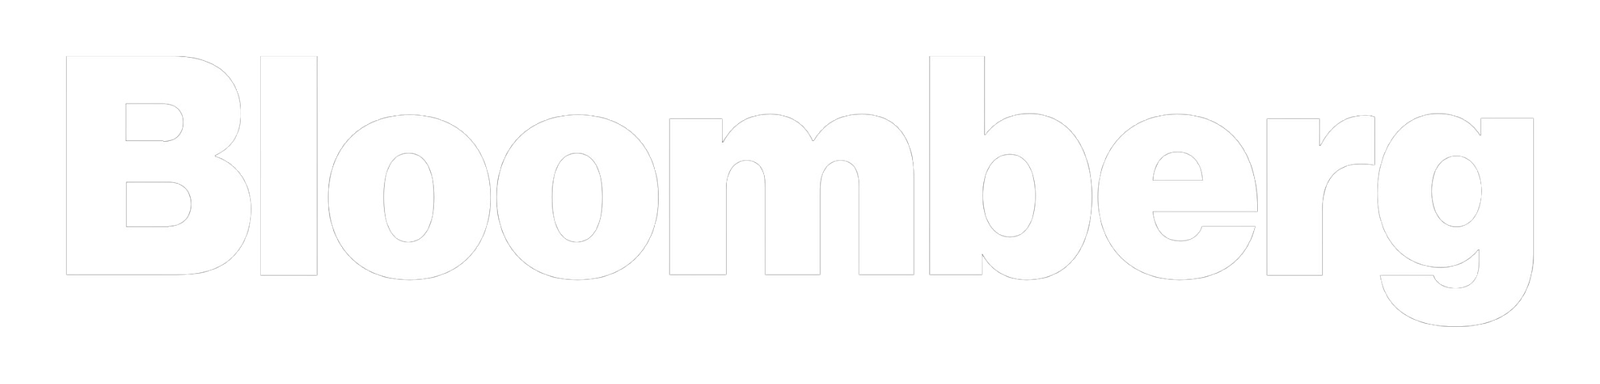 bloomberg icon logo png